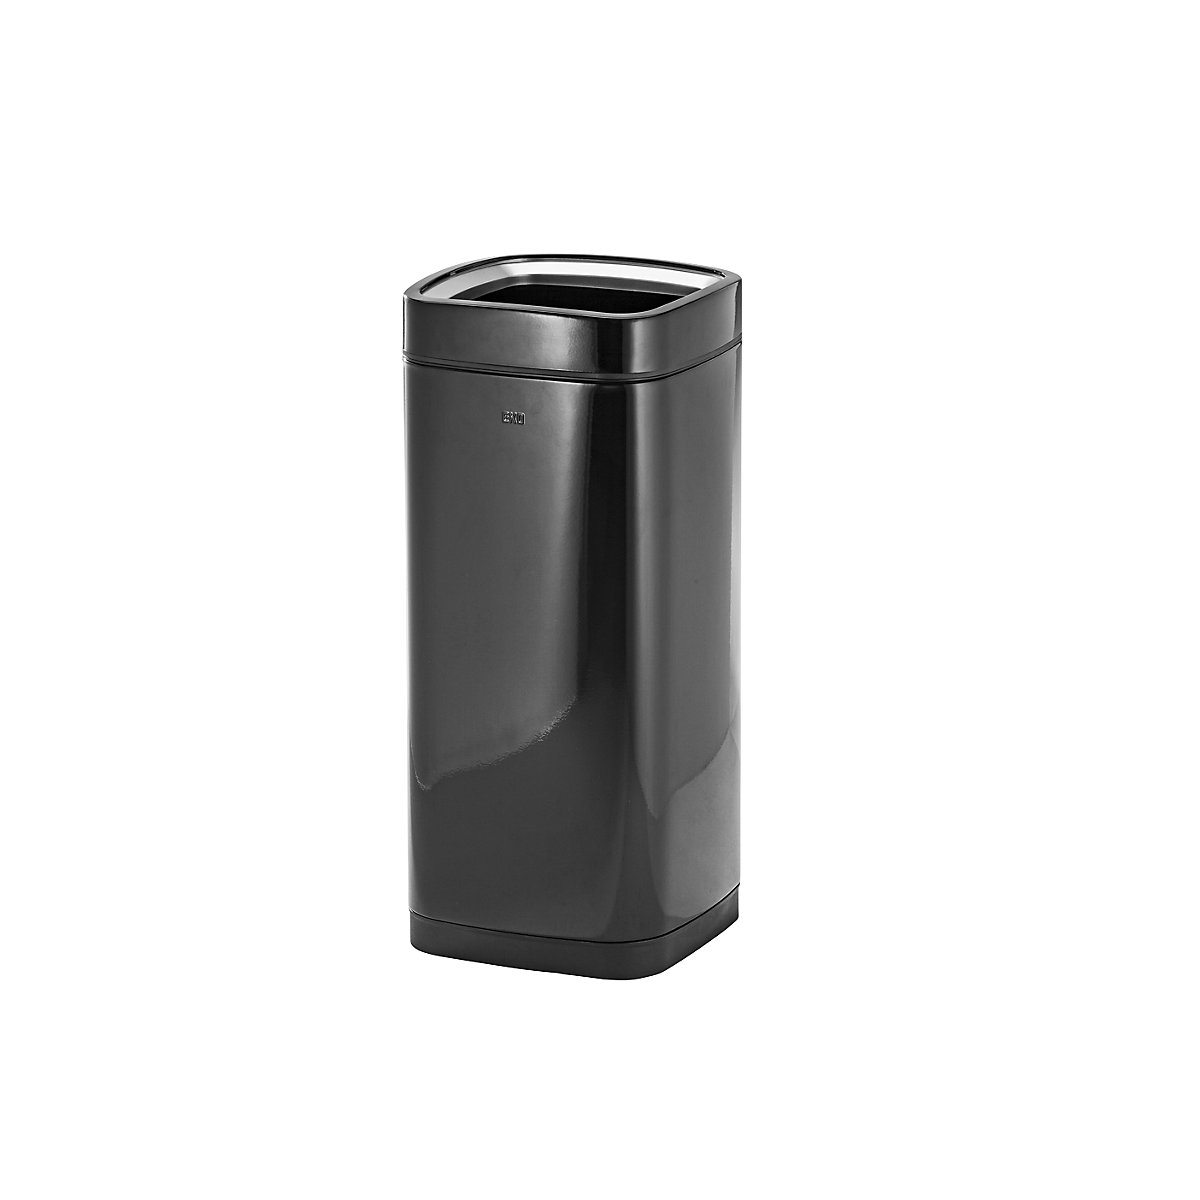 Waste paper bin with inner container – EKO